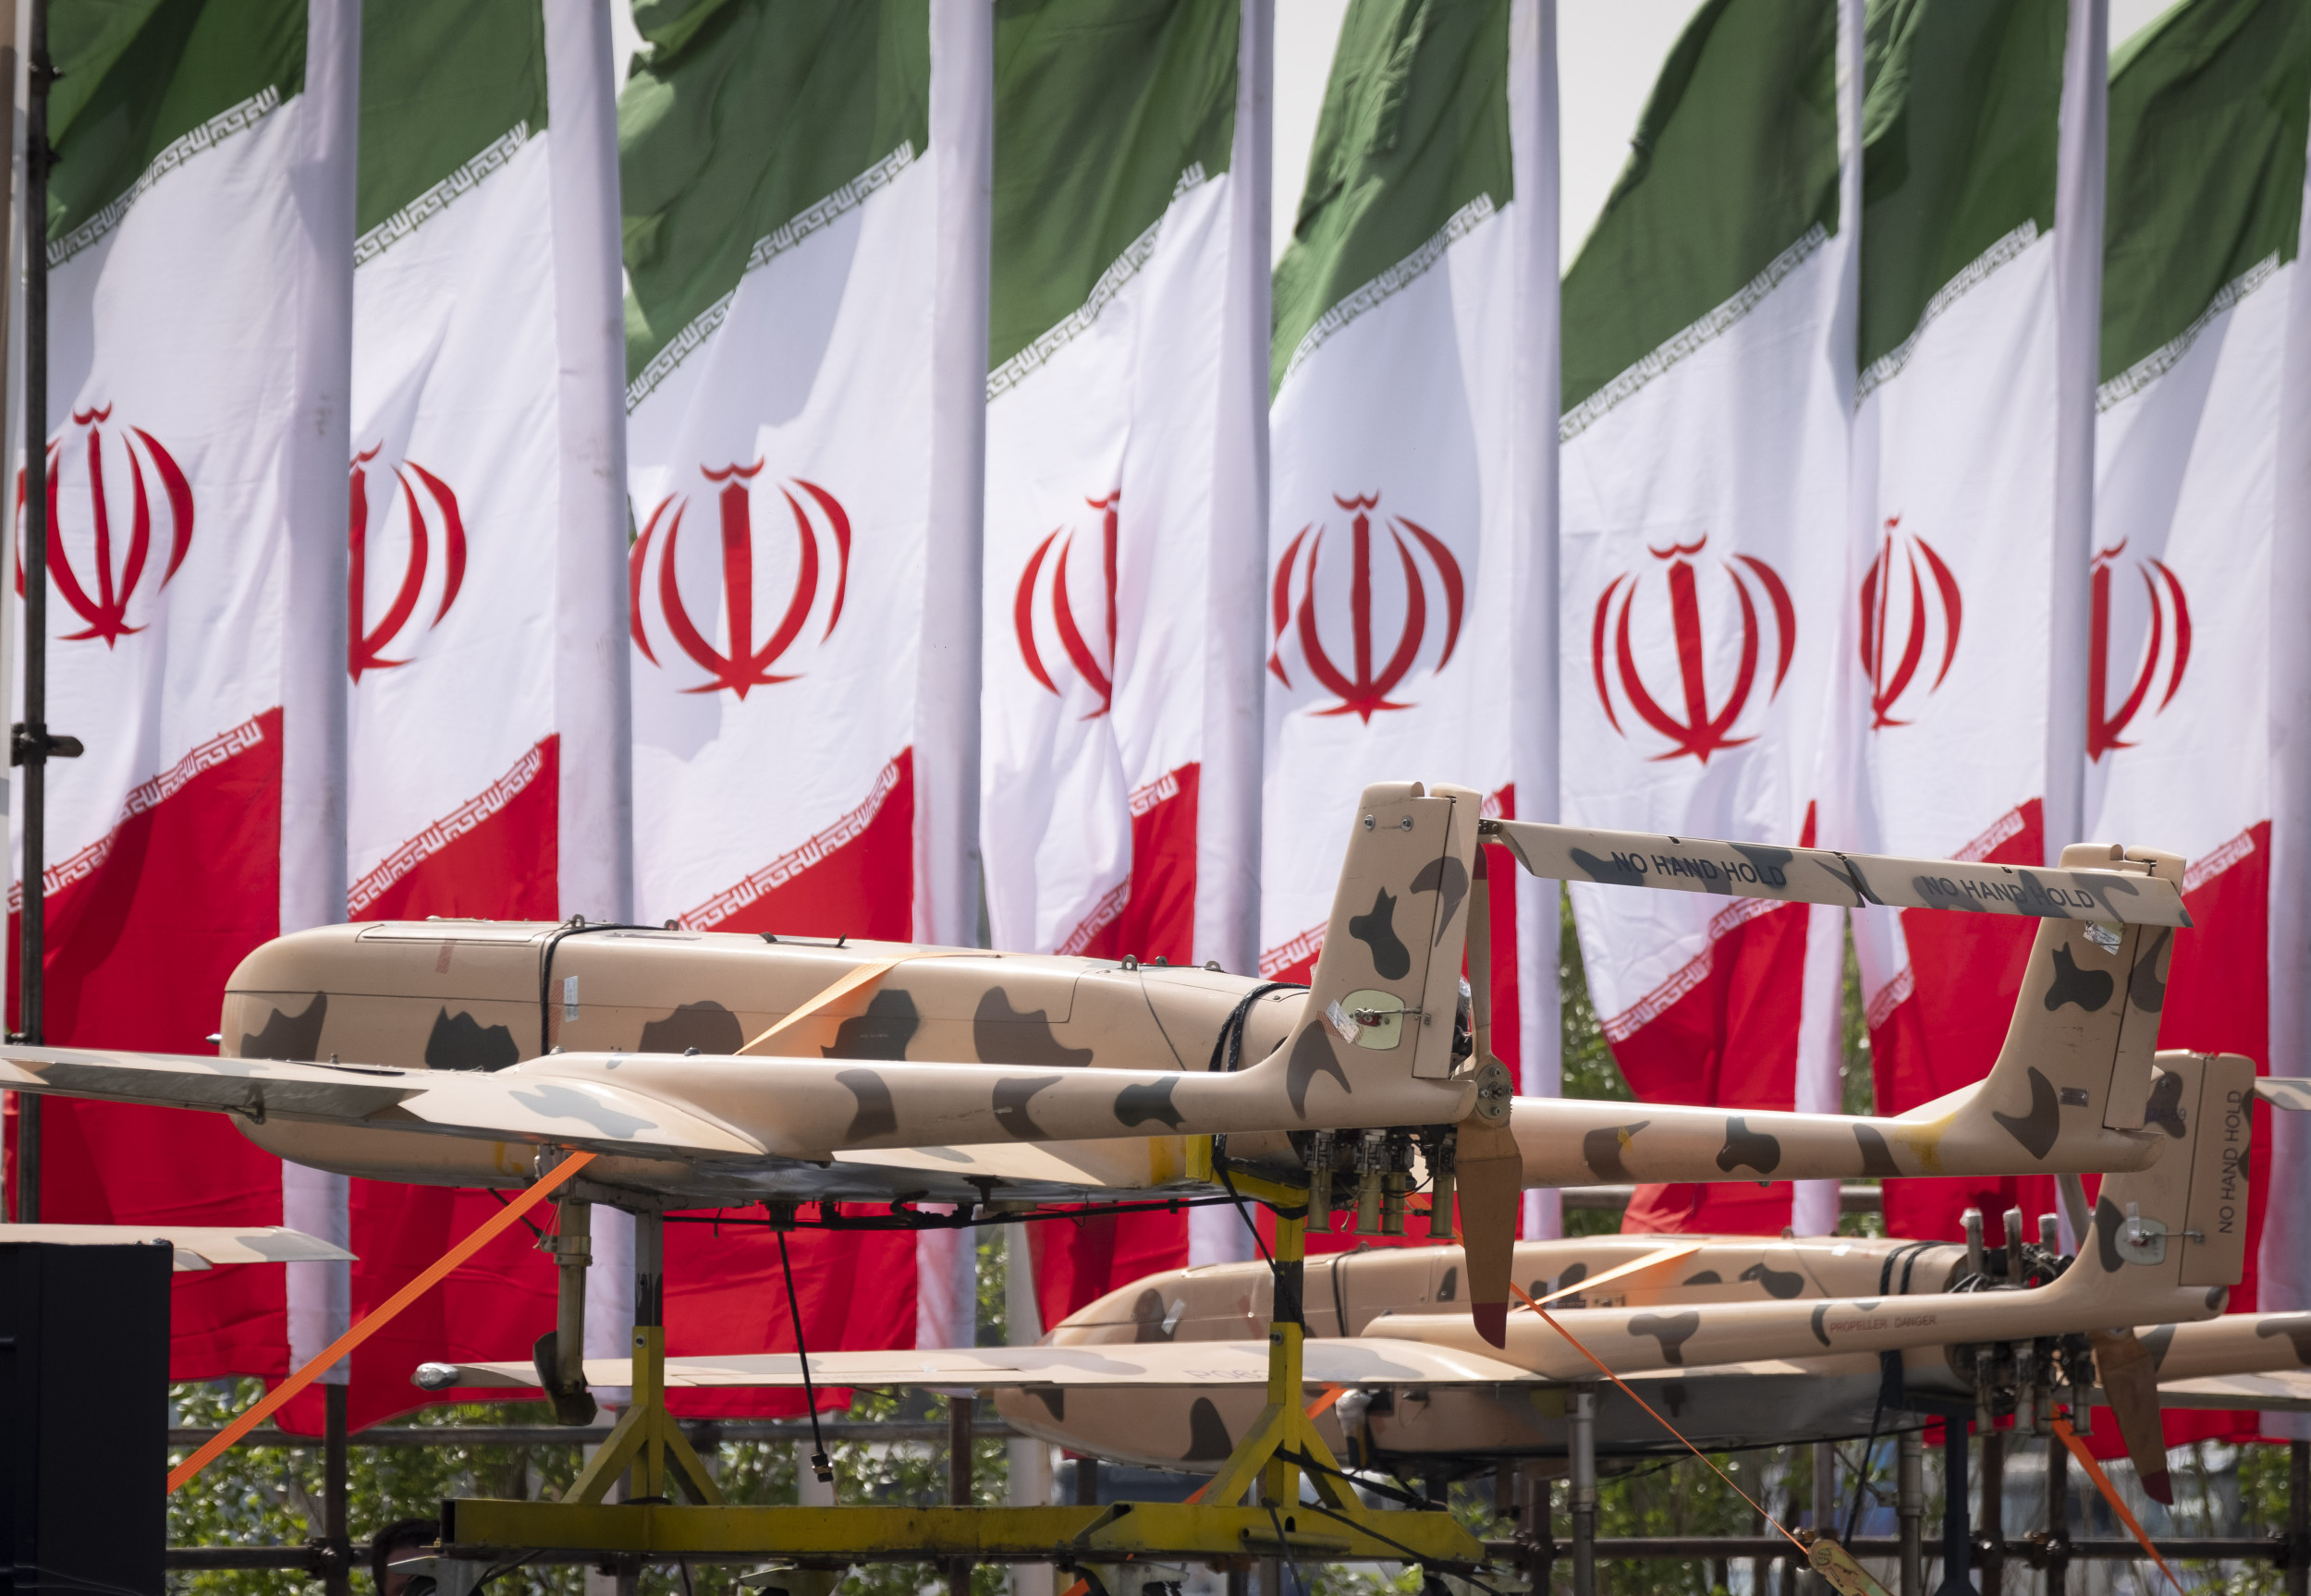 We Must Act Now to Prevent the Next Attack by Iran